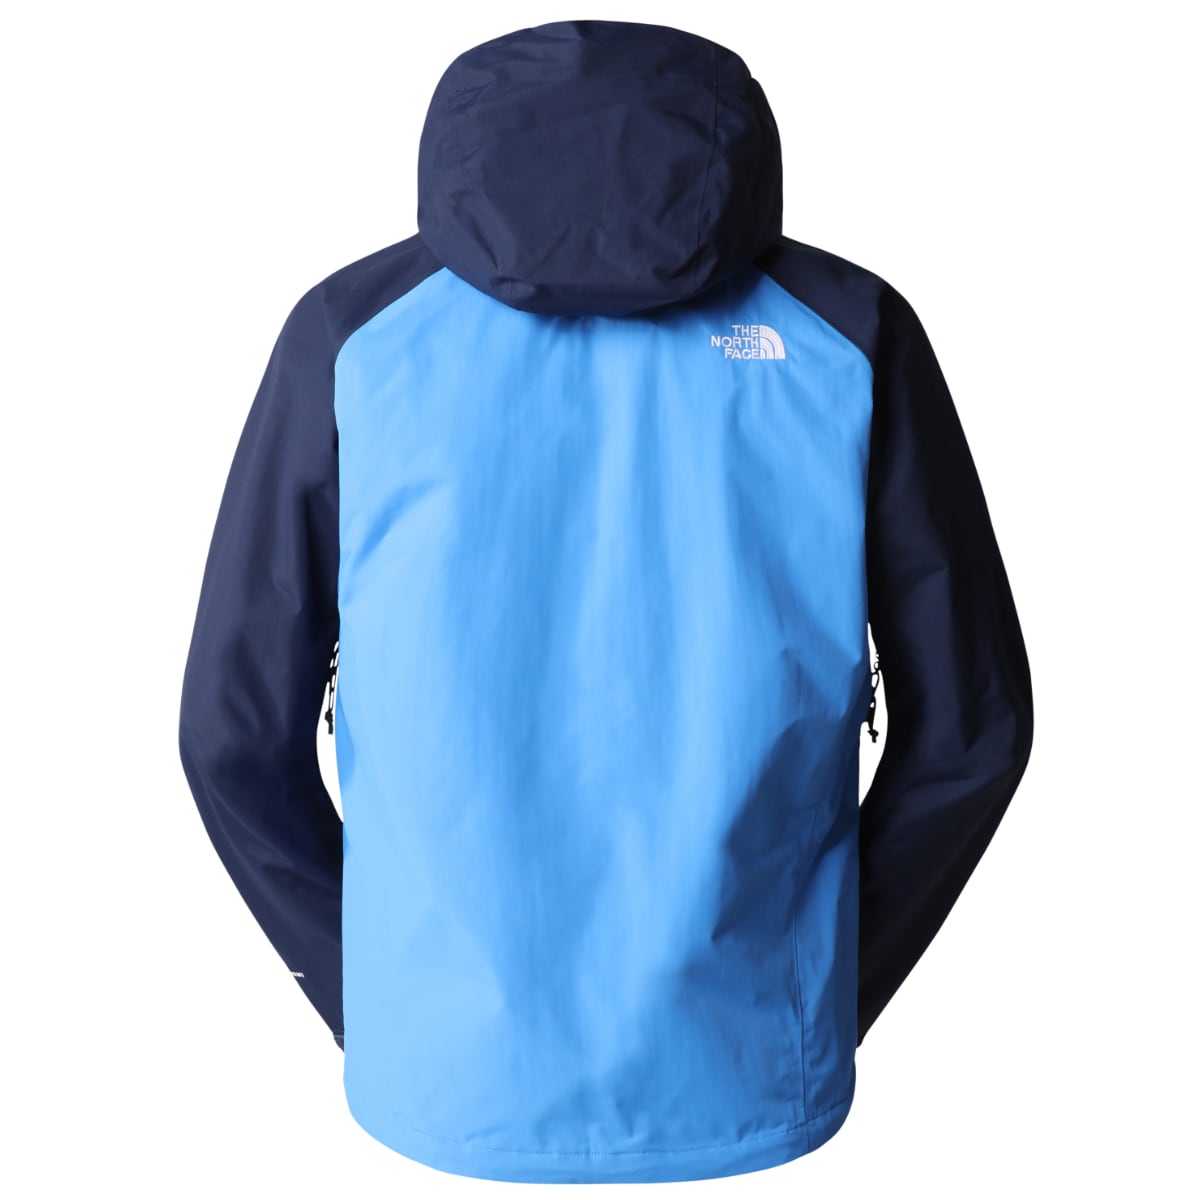 The North Face Stratos Waterproof Men's Jacket | Super Sonic Blue-Fiery Red-Summit Navy